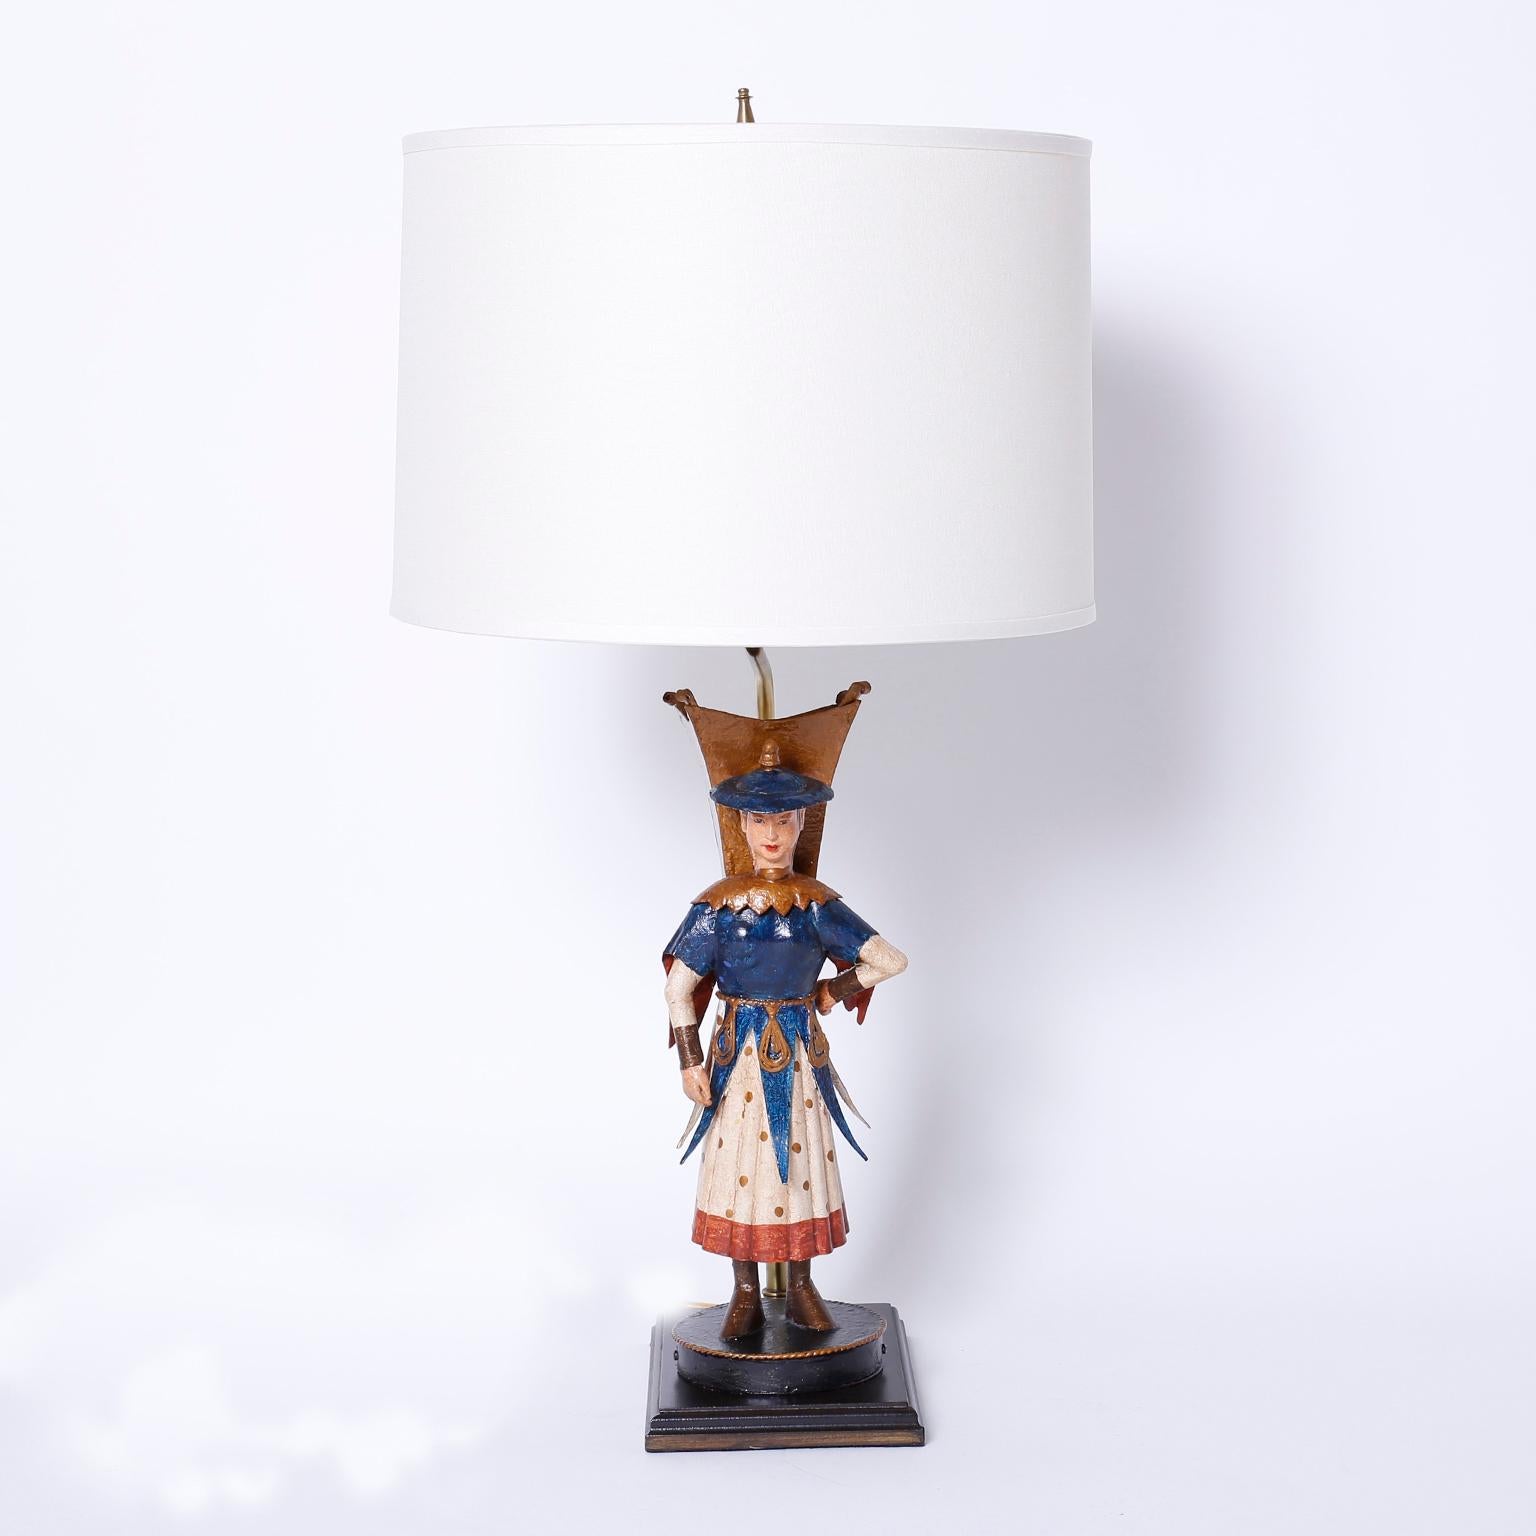 Eccentric pair of vintage tole or painted metal table lamps depicting
female and male Asian figures dressed in dramatic attire.